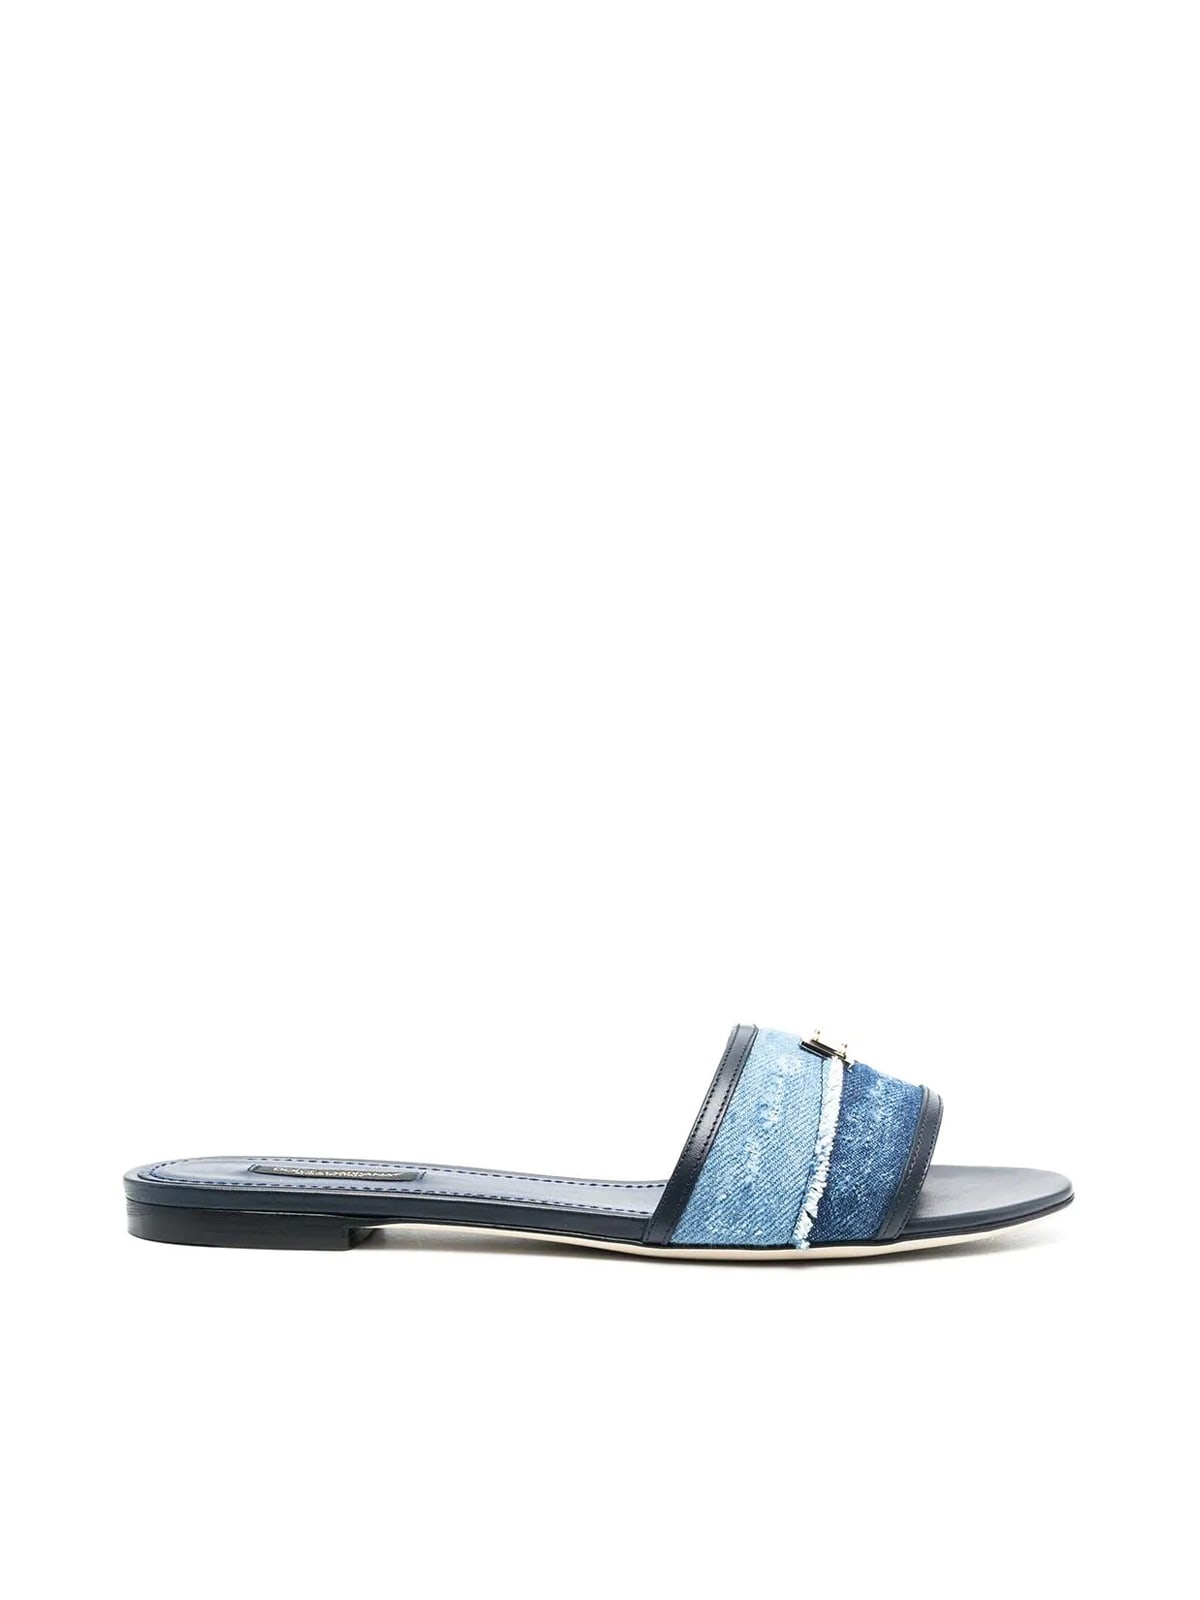 Buy Dolce & Gabbana Mules Flat Patch Denim online, shop Dolce & Gabbana shoes with free shipping